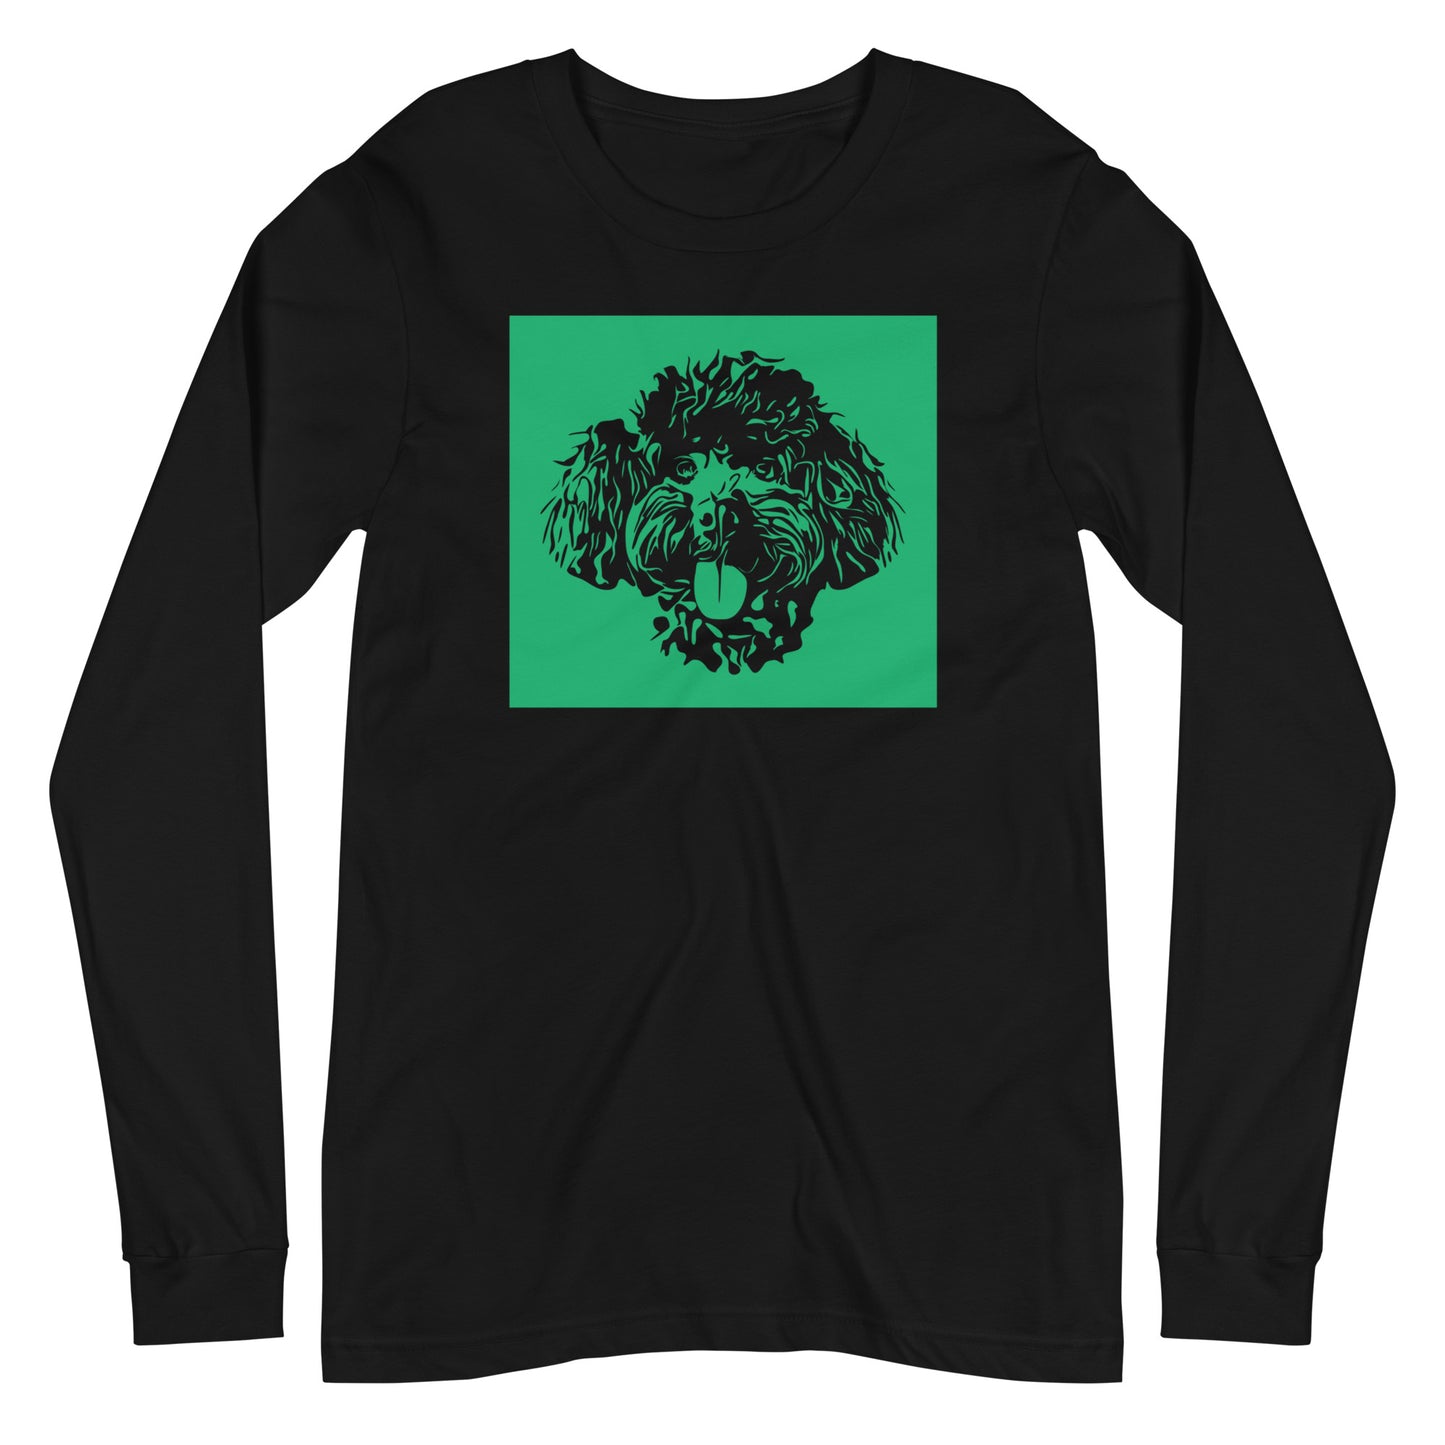 Toy Poodle face Silhouette with green background square on unisex black long sleeve t-shirt